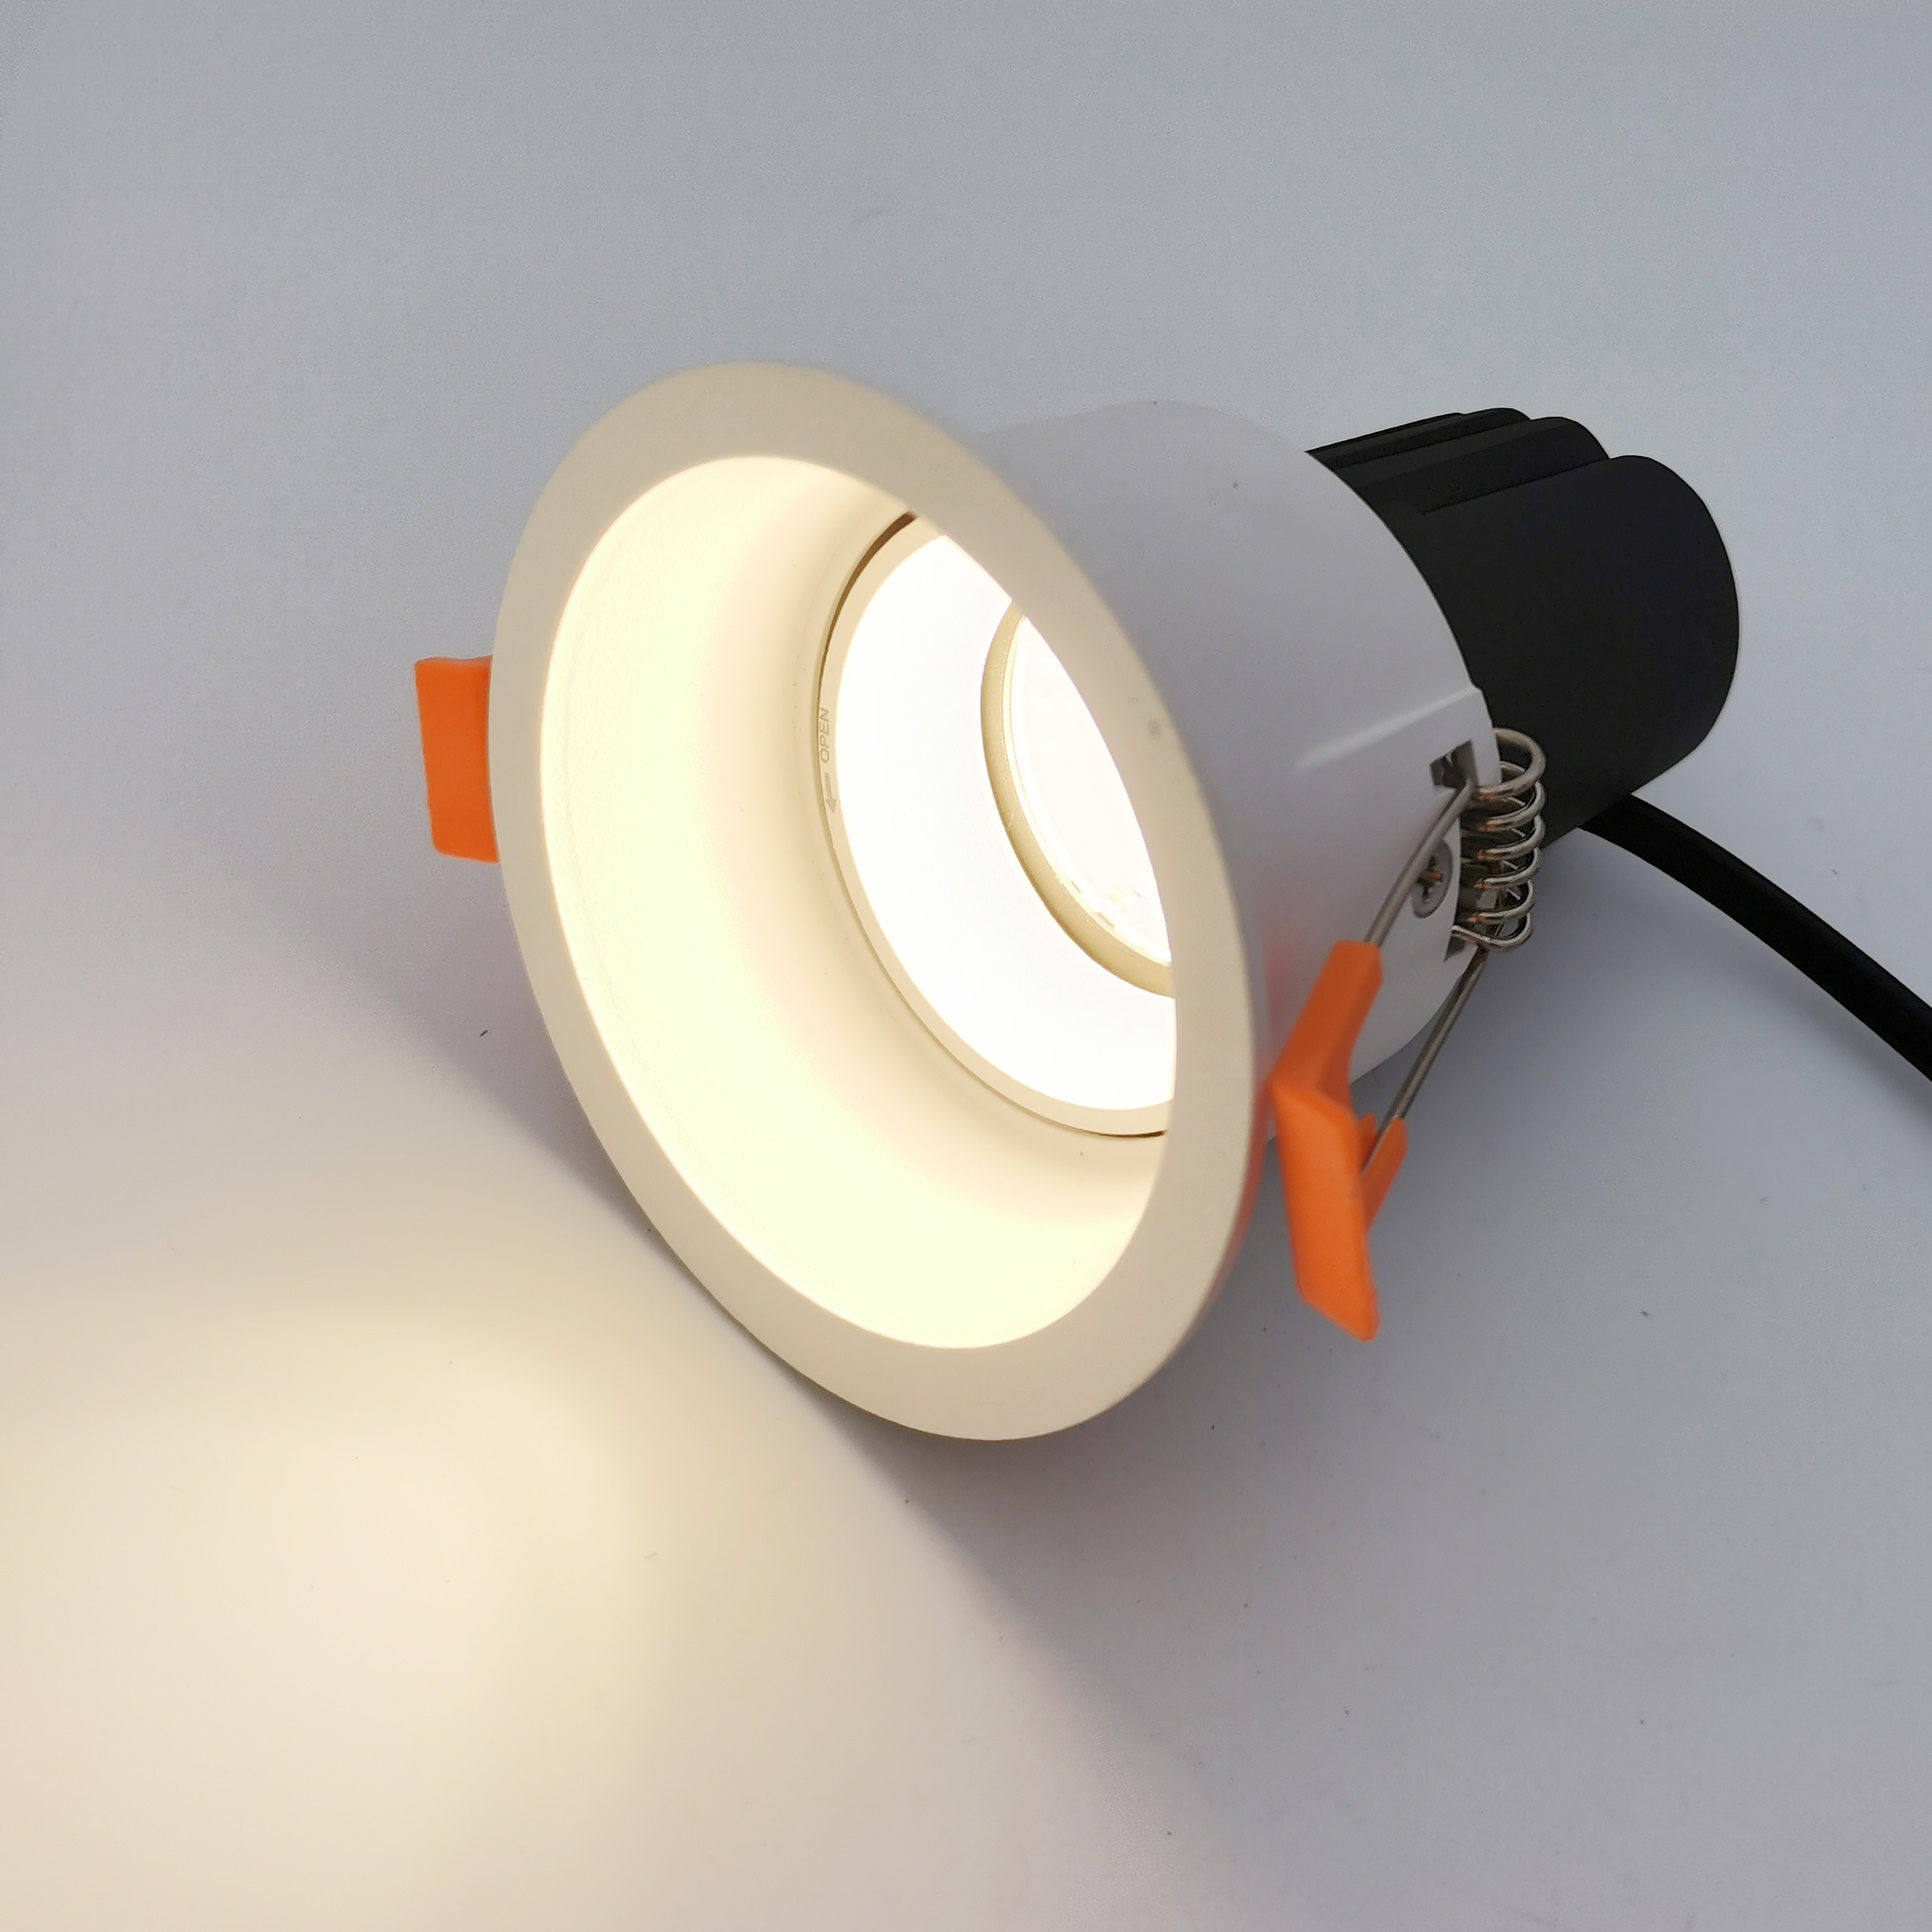 Outcut 75mm Anti-glare 7W 12W 15W 20W LED Daylight Recessed Lighting LED Down Light adjustable LED Downlight